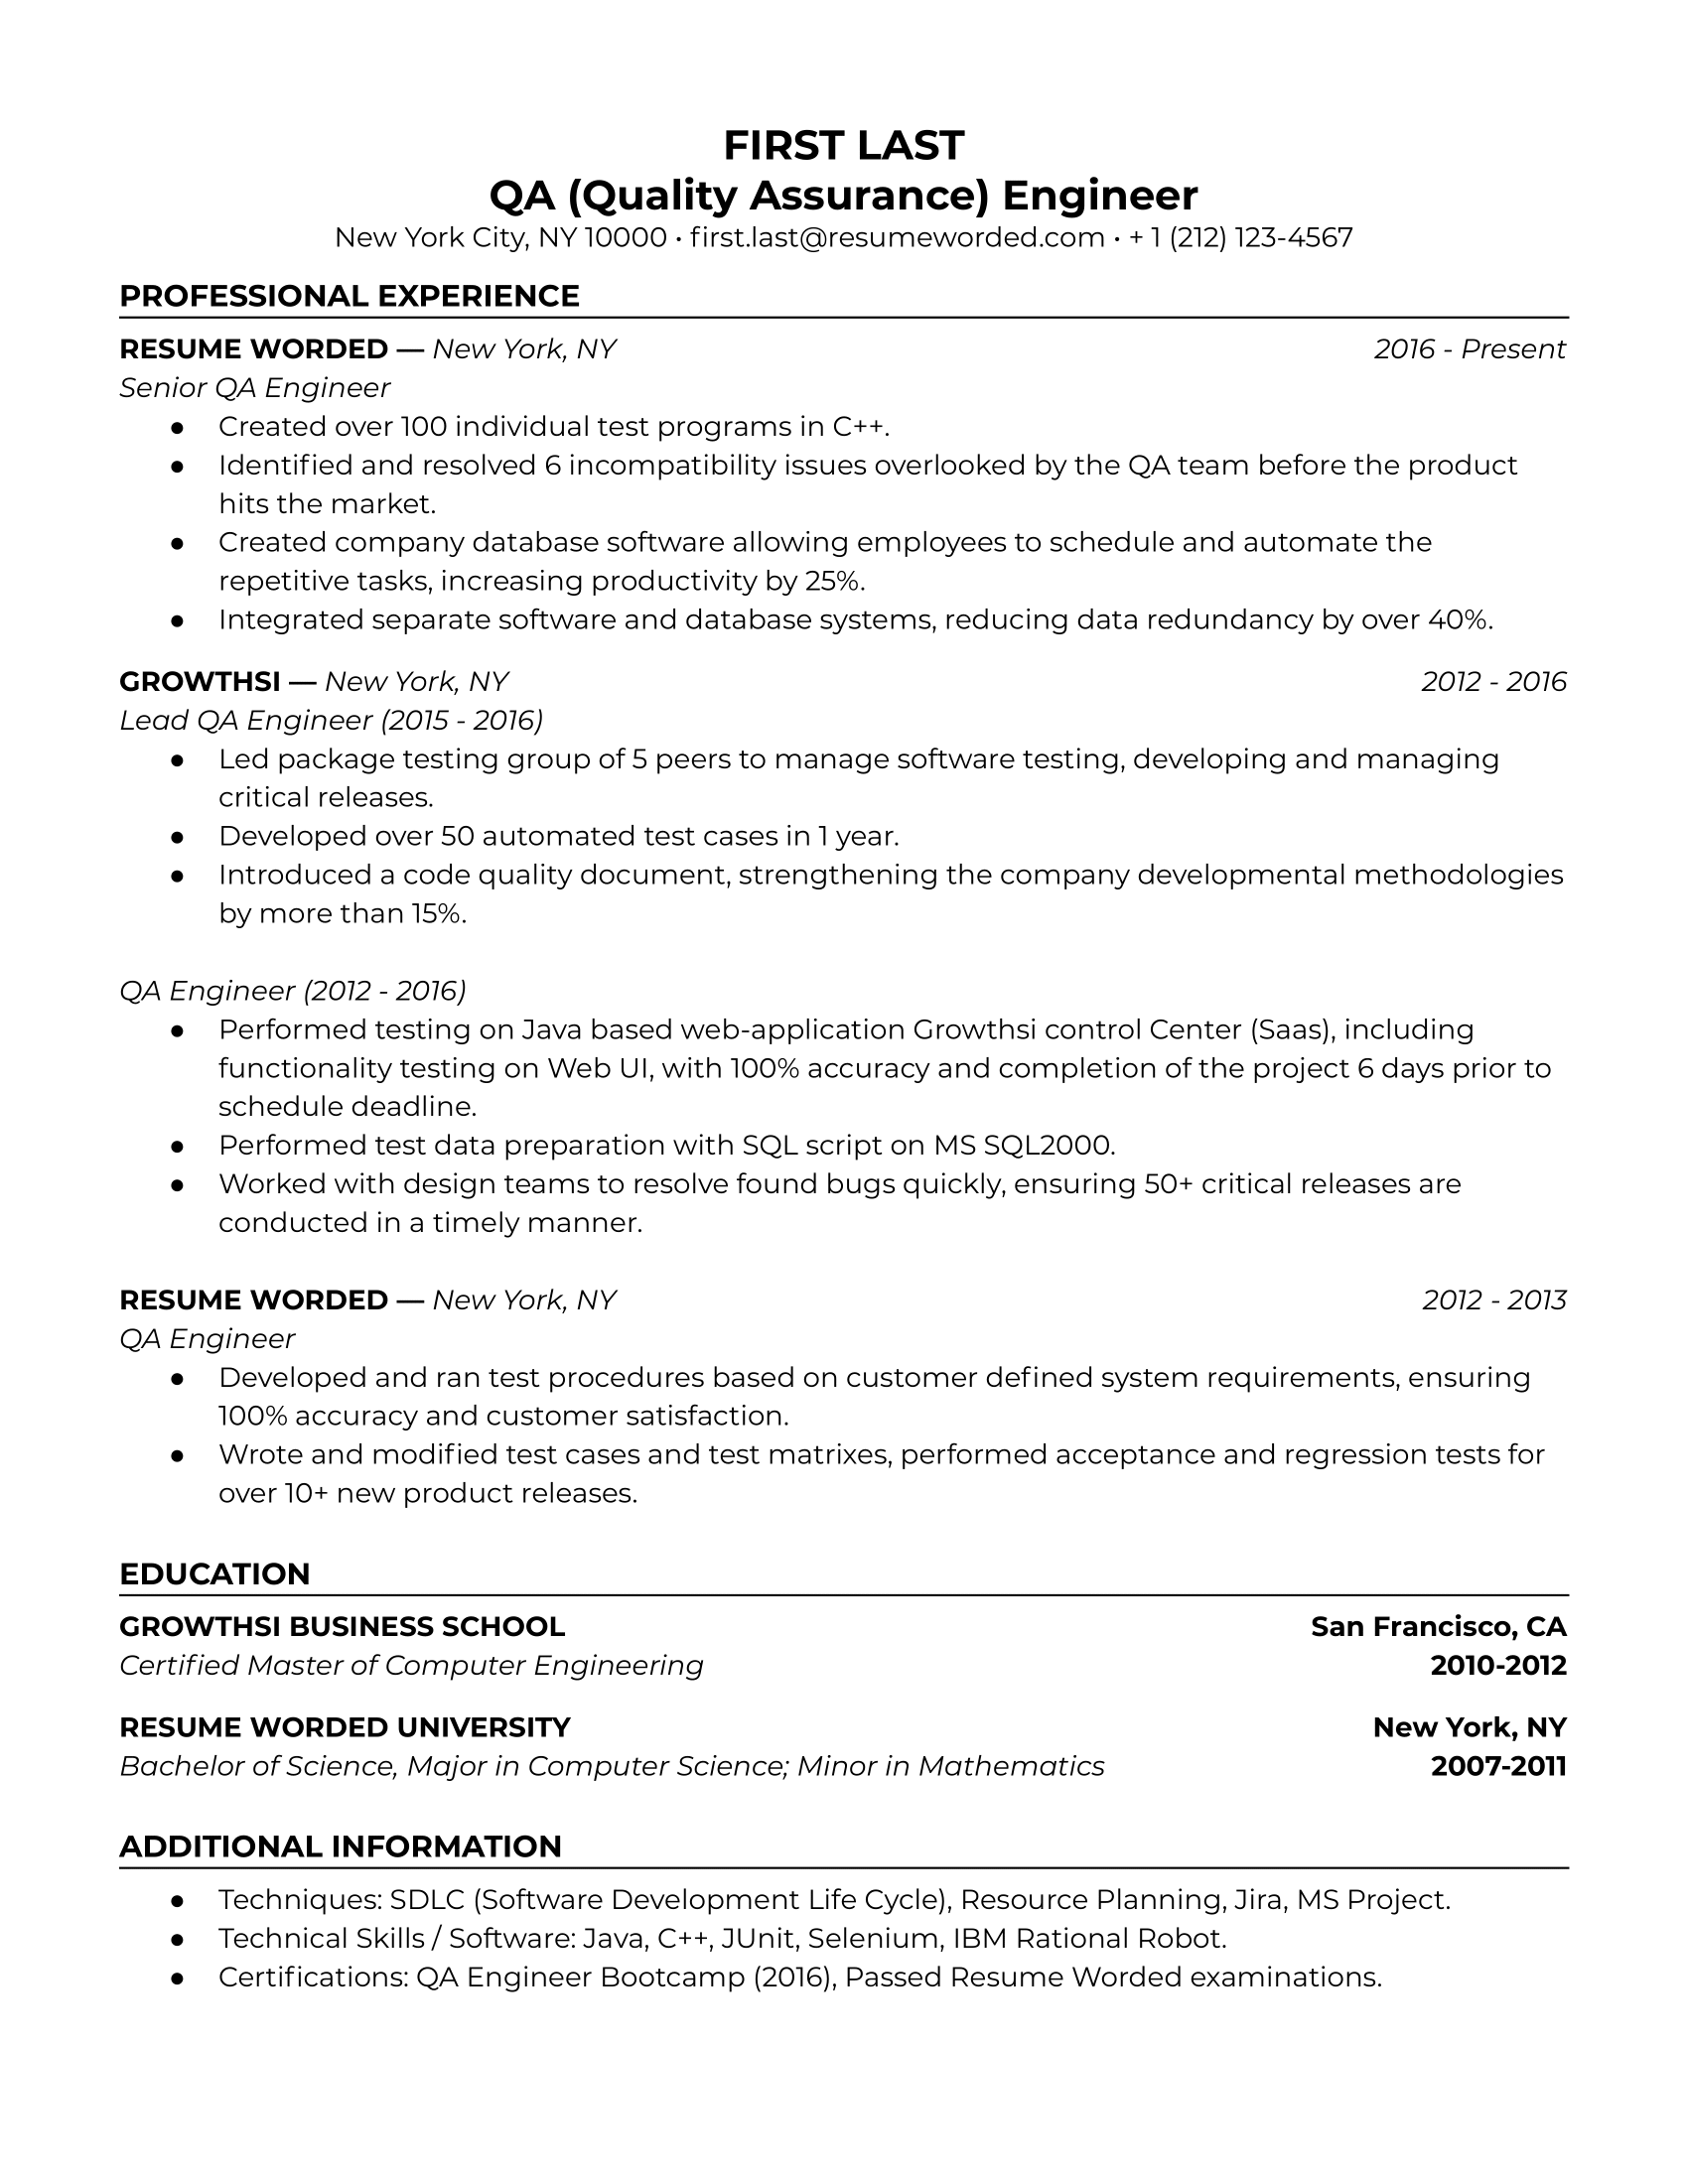 A sample QA Engineer resume which demonstrates the ways that QA Engineers work in both customer-facing and internal roles. 